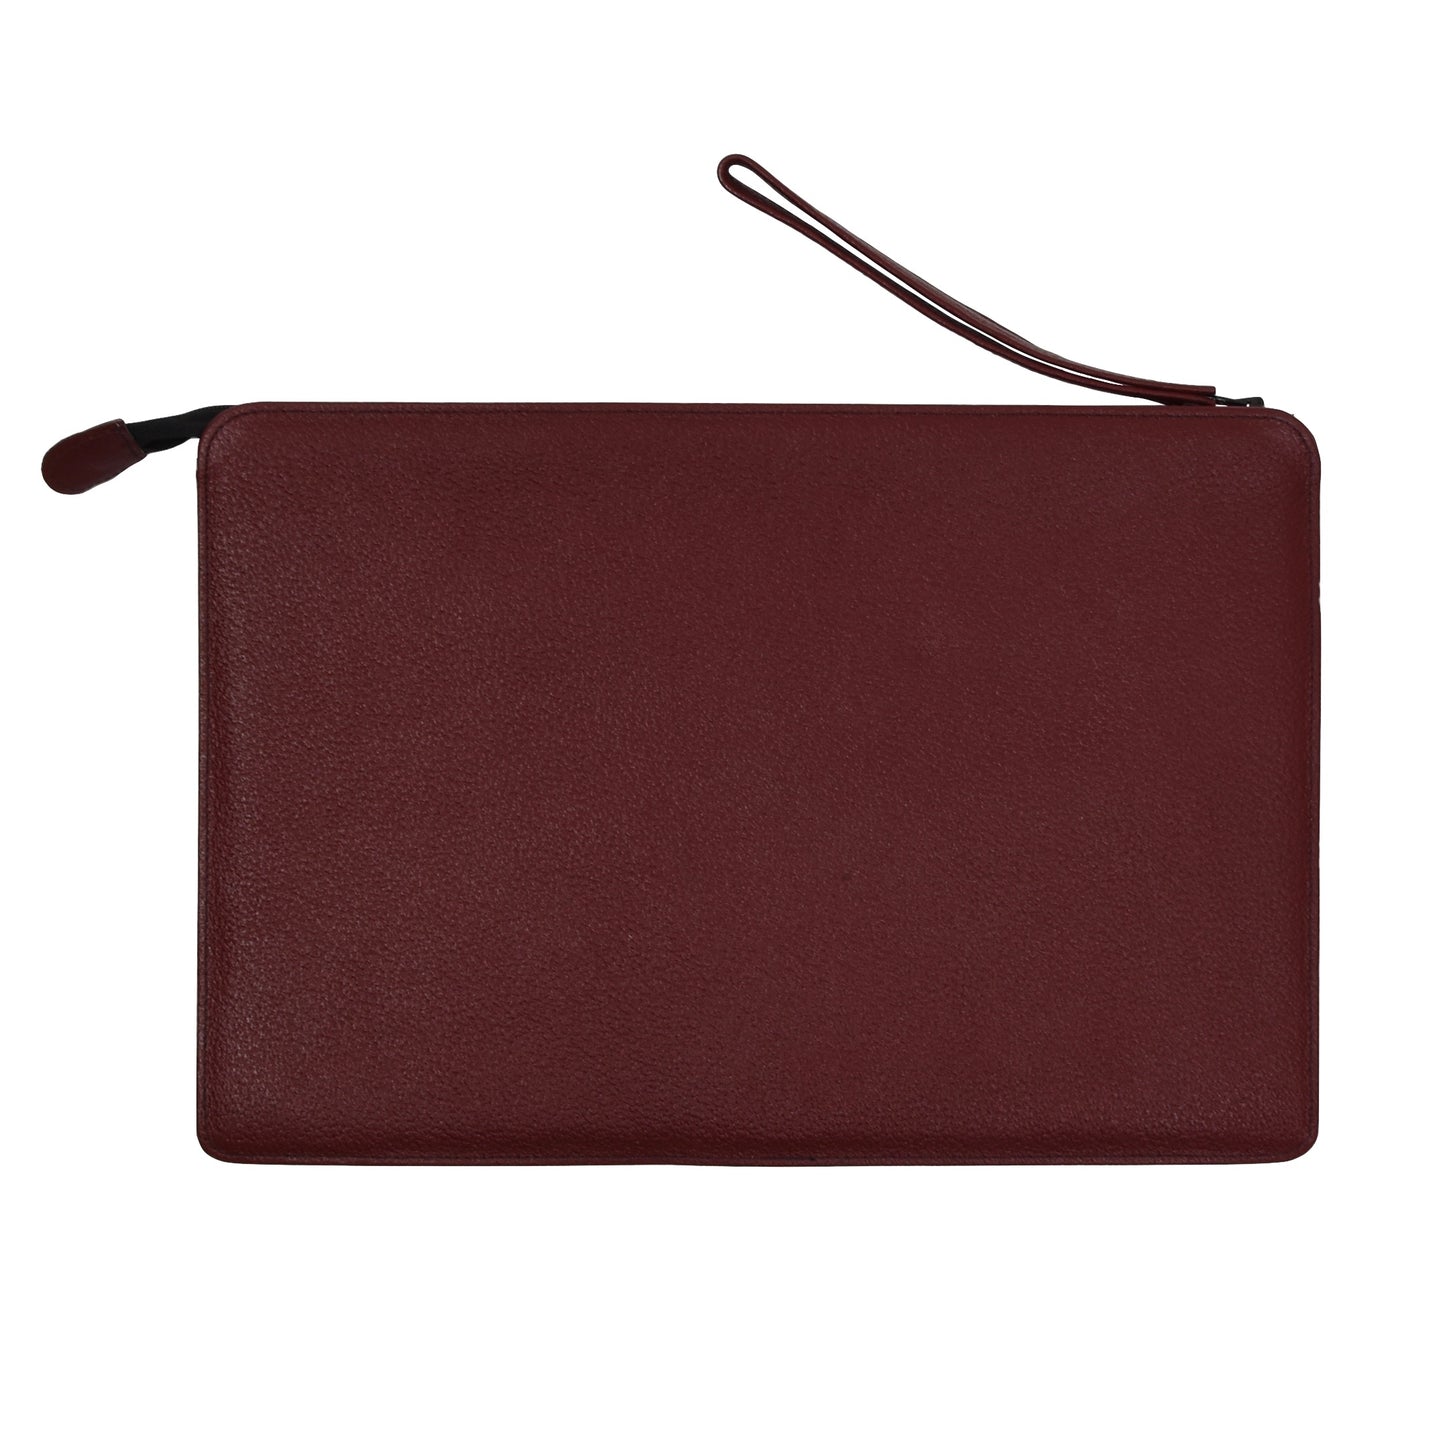 2x Leather Document Holders - Red